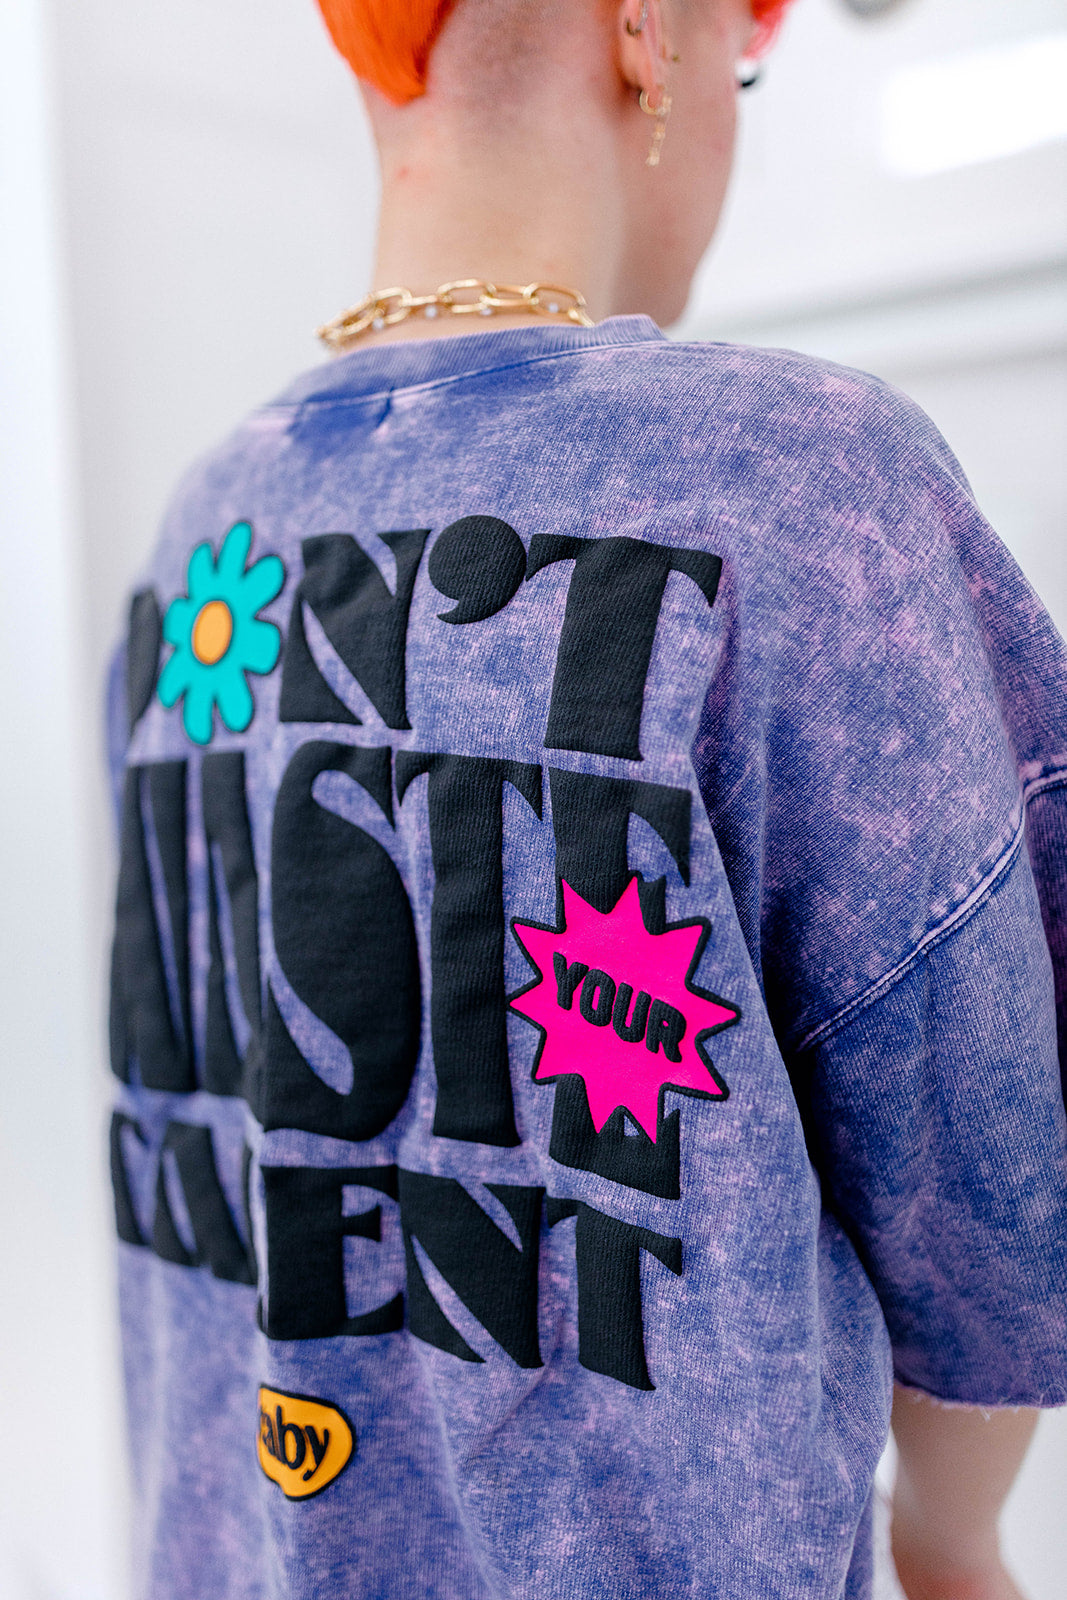 TABY ORIGINAL: DON’T WASTE YOUR TALENT BOYFRIEND TEE IN BLUEBERRY ACID WASH + EXTREME PUFF***